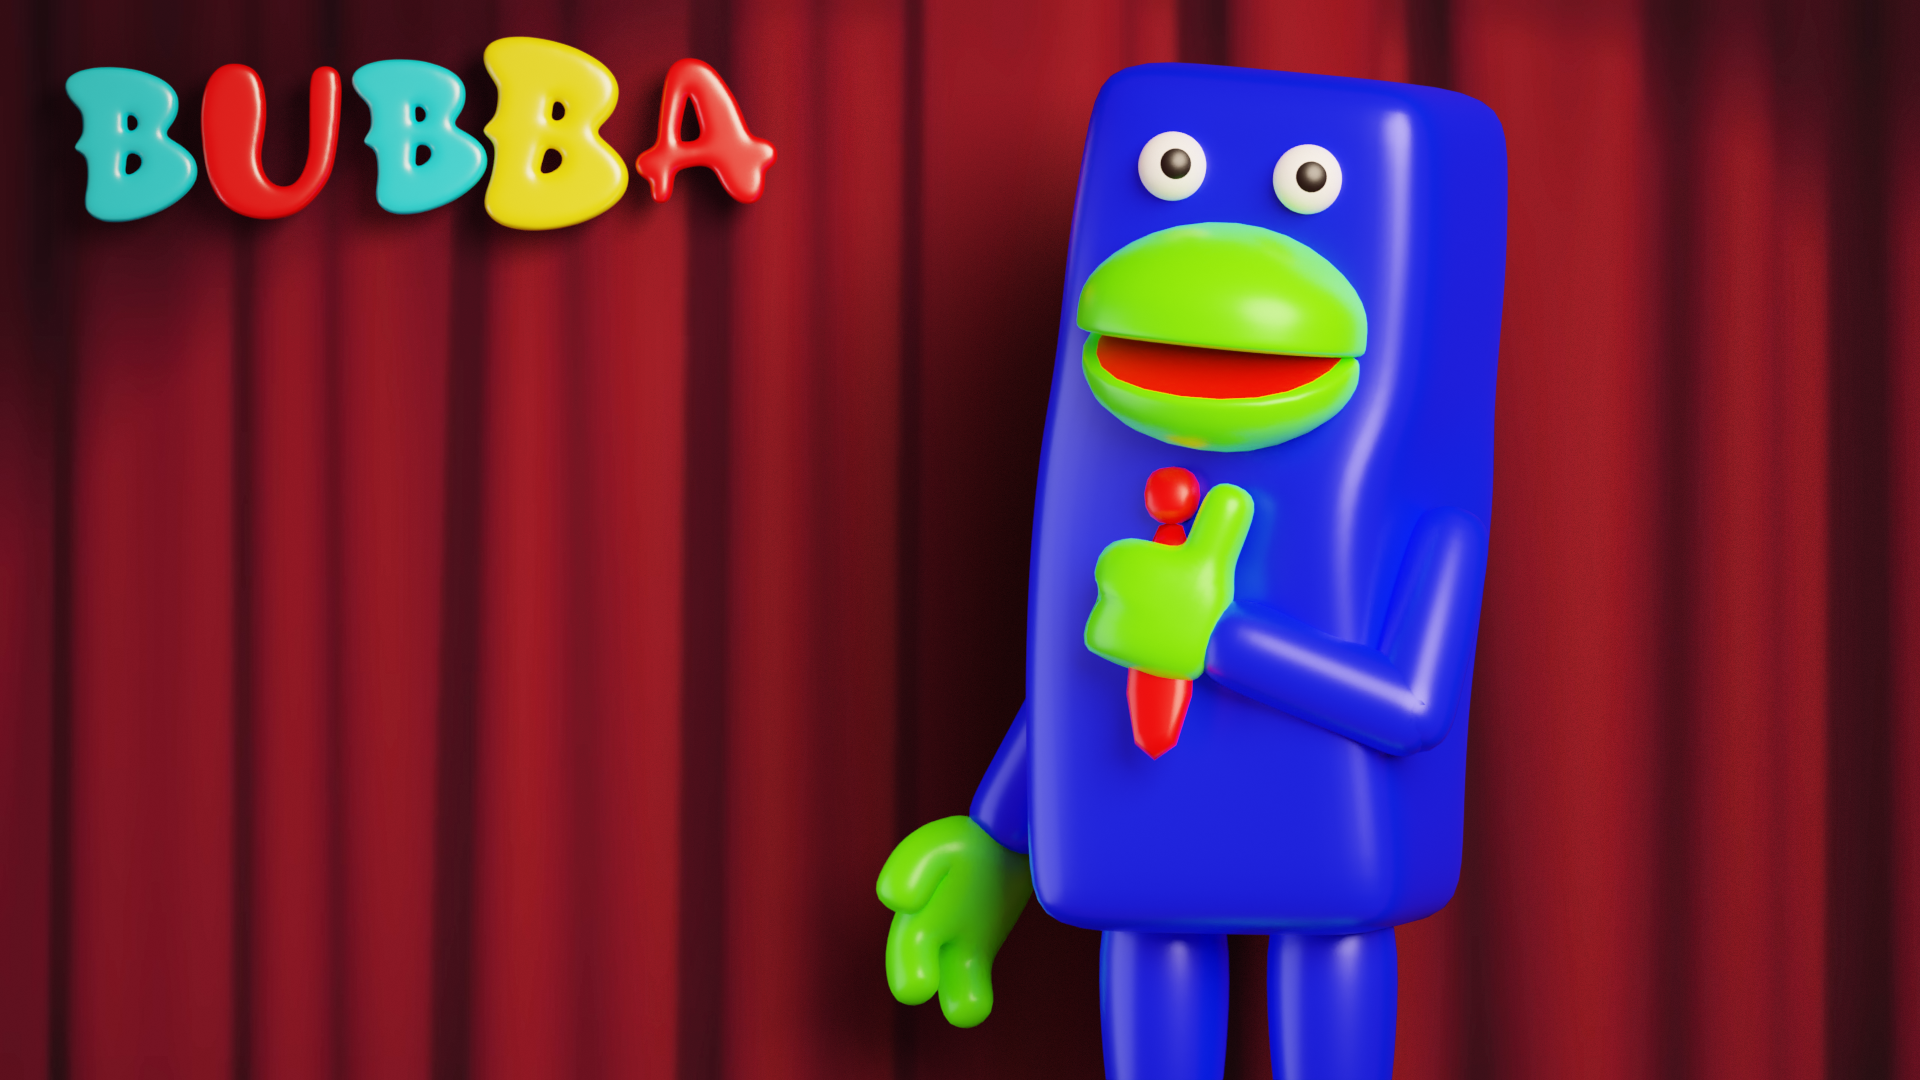 TADC: Bubba by nuclearboi on Newgrounds